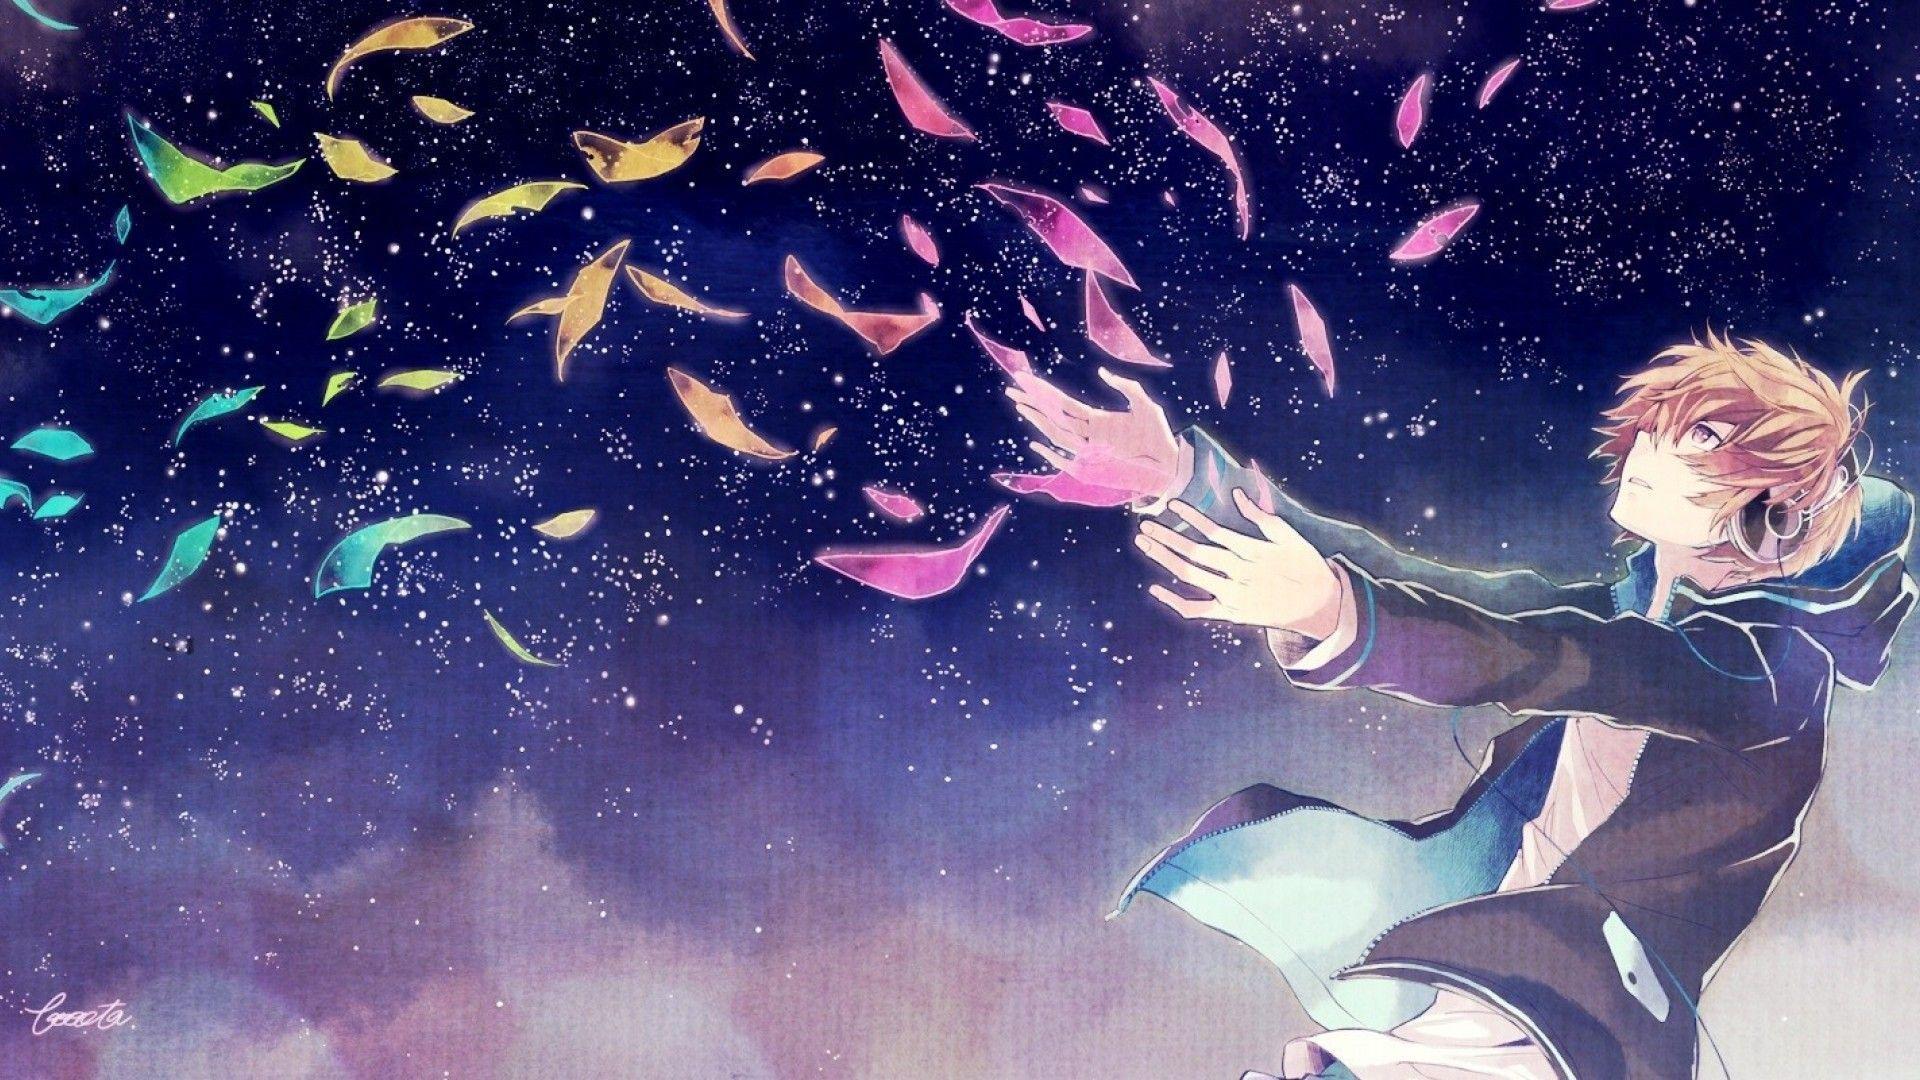 Download wallpaper 800x1200 anime girl fun music headphones iphone 4s4  for parallax hd background